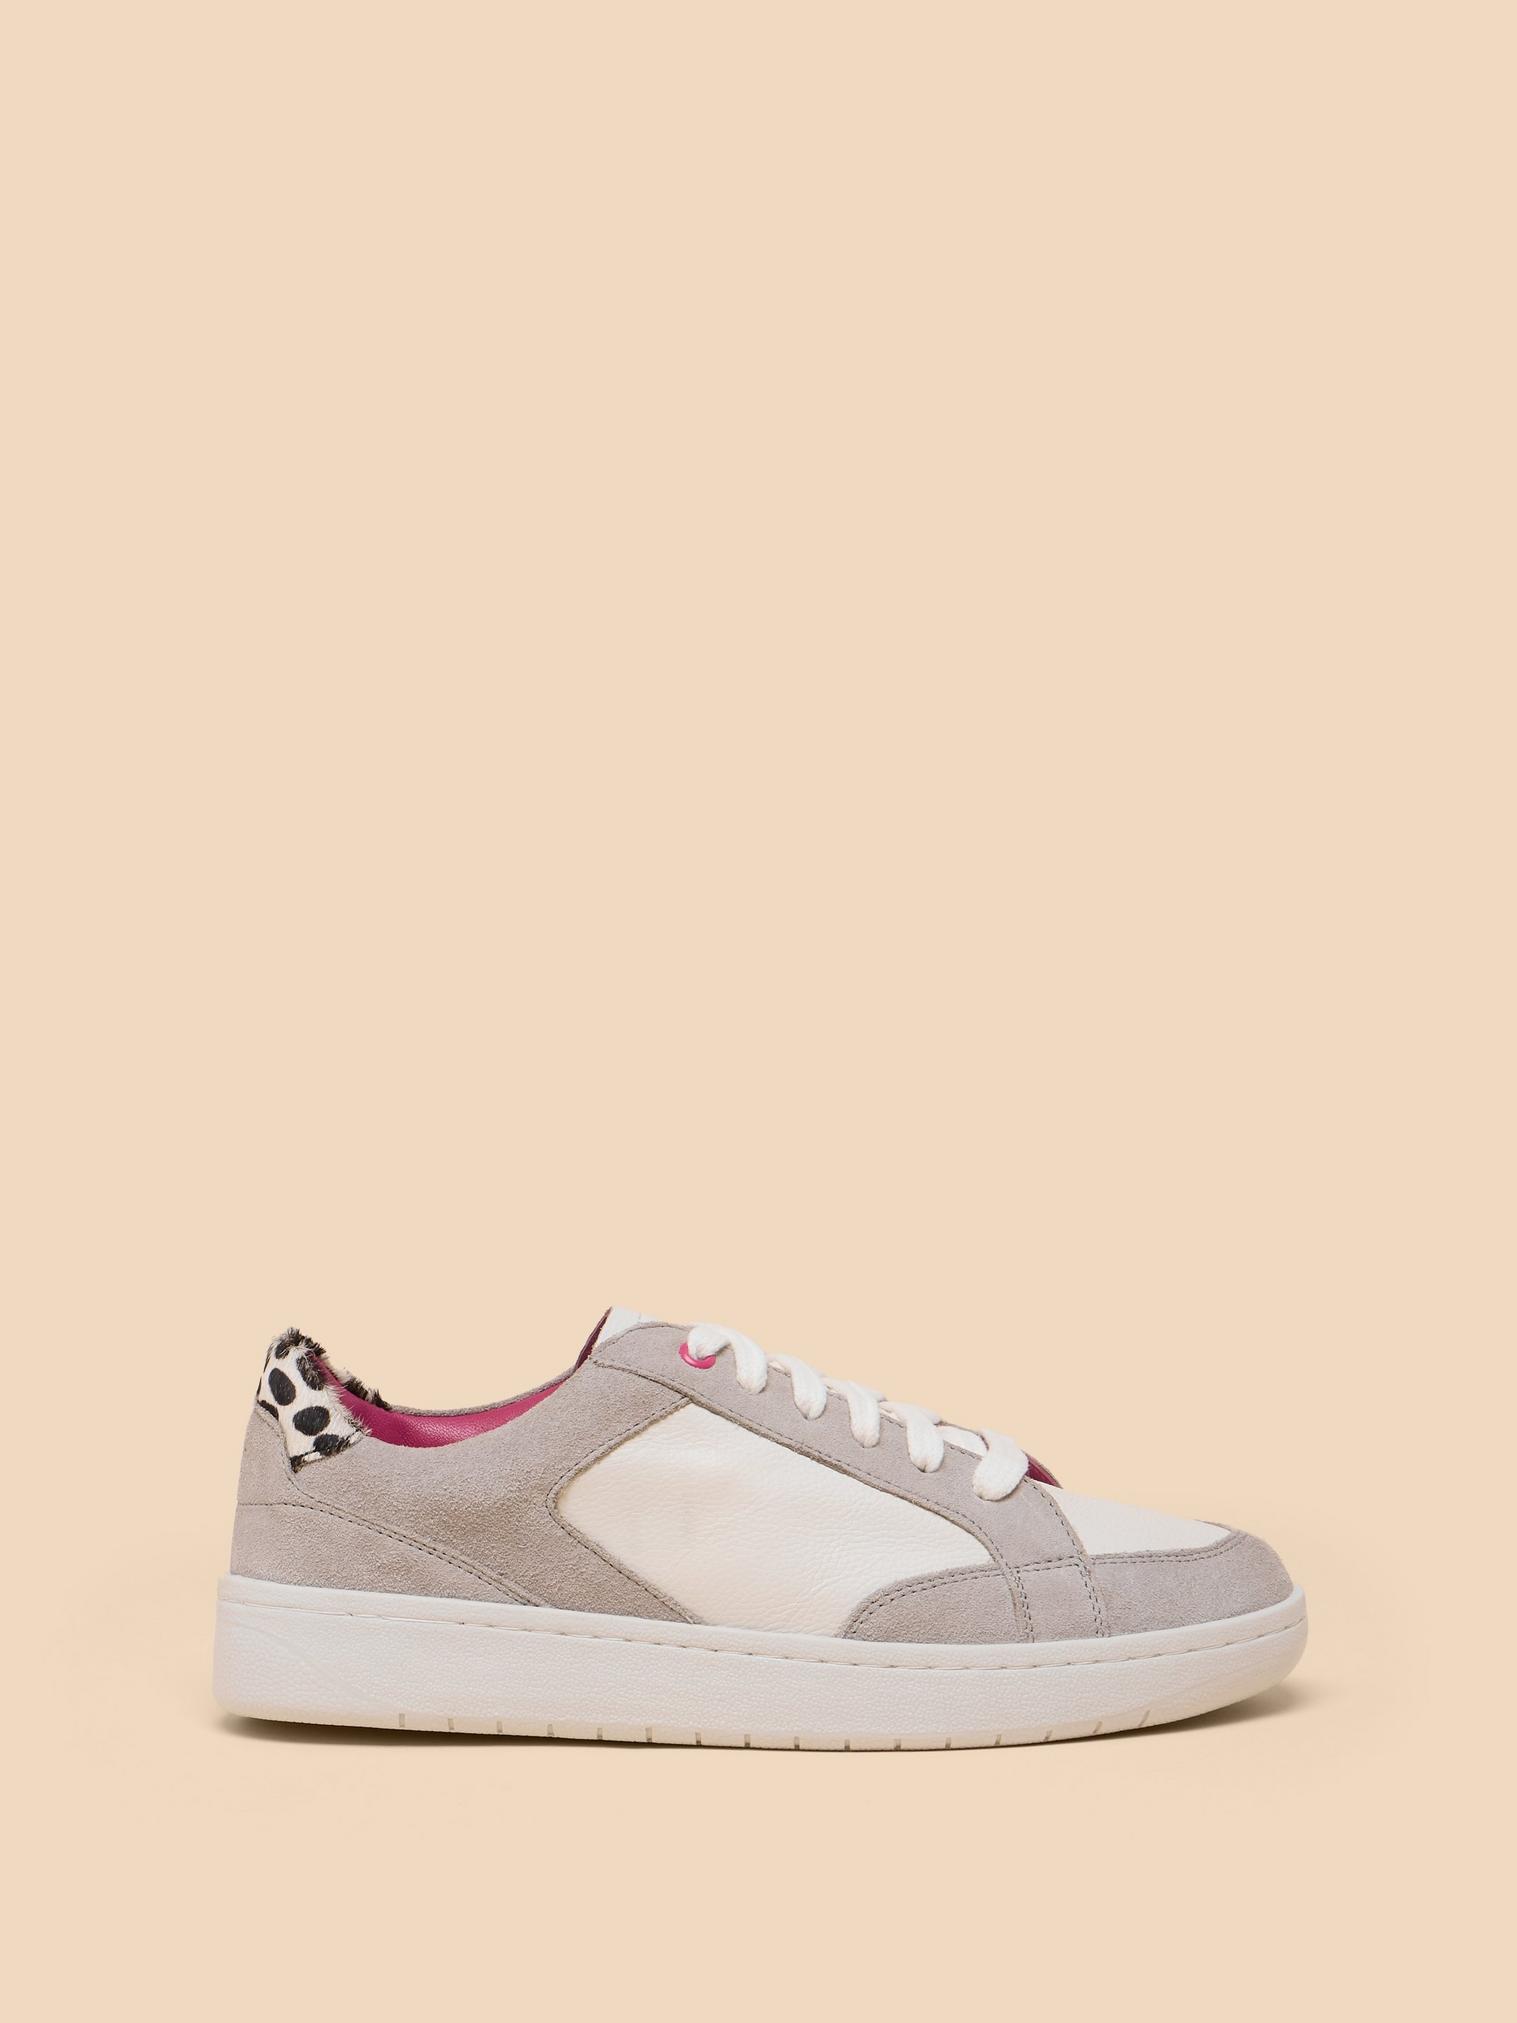 Dahlia Leather Trainer in WHITE MLT - LIFESTYLE